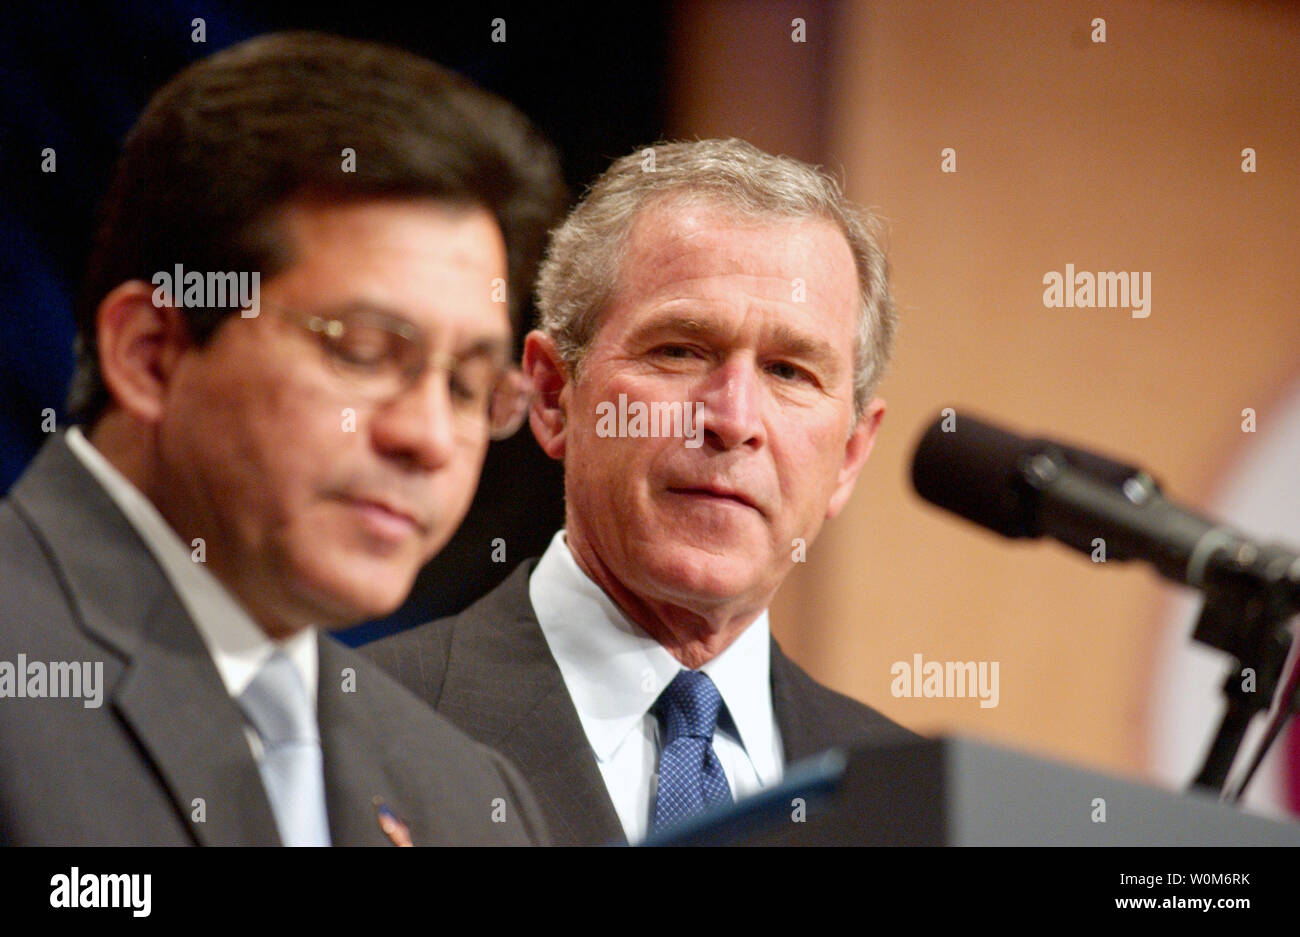 United States President George W. Bush is introduced by Attorney General Alberto Gonzales before making remarks to the United States Hispanic Chamber of Commerce Legislative Conference in Washington, D.C. on April 20, 2005.  The President called on Congress to pass his comprehensive energy plan before their August recess.   (UPI Photo/ Ron Sachs / Pool) Stock Photo